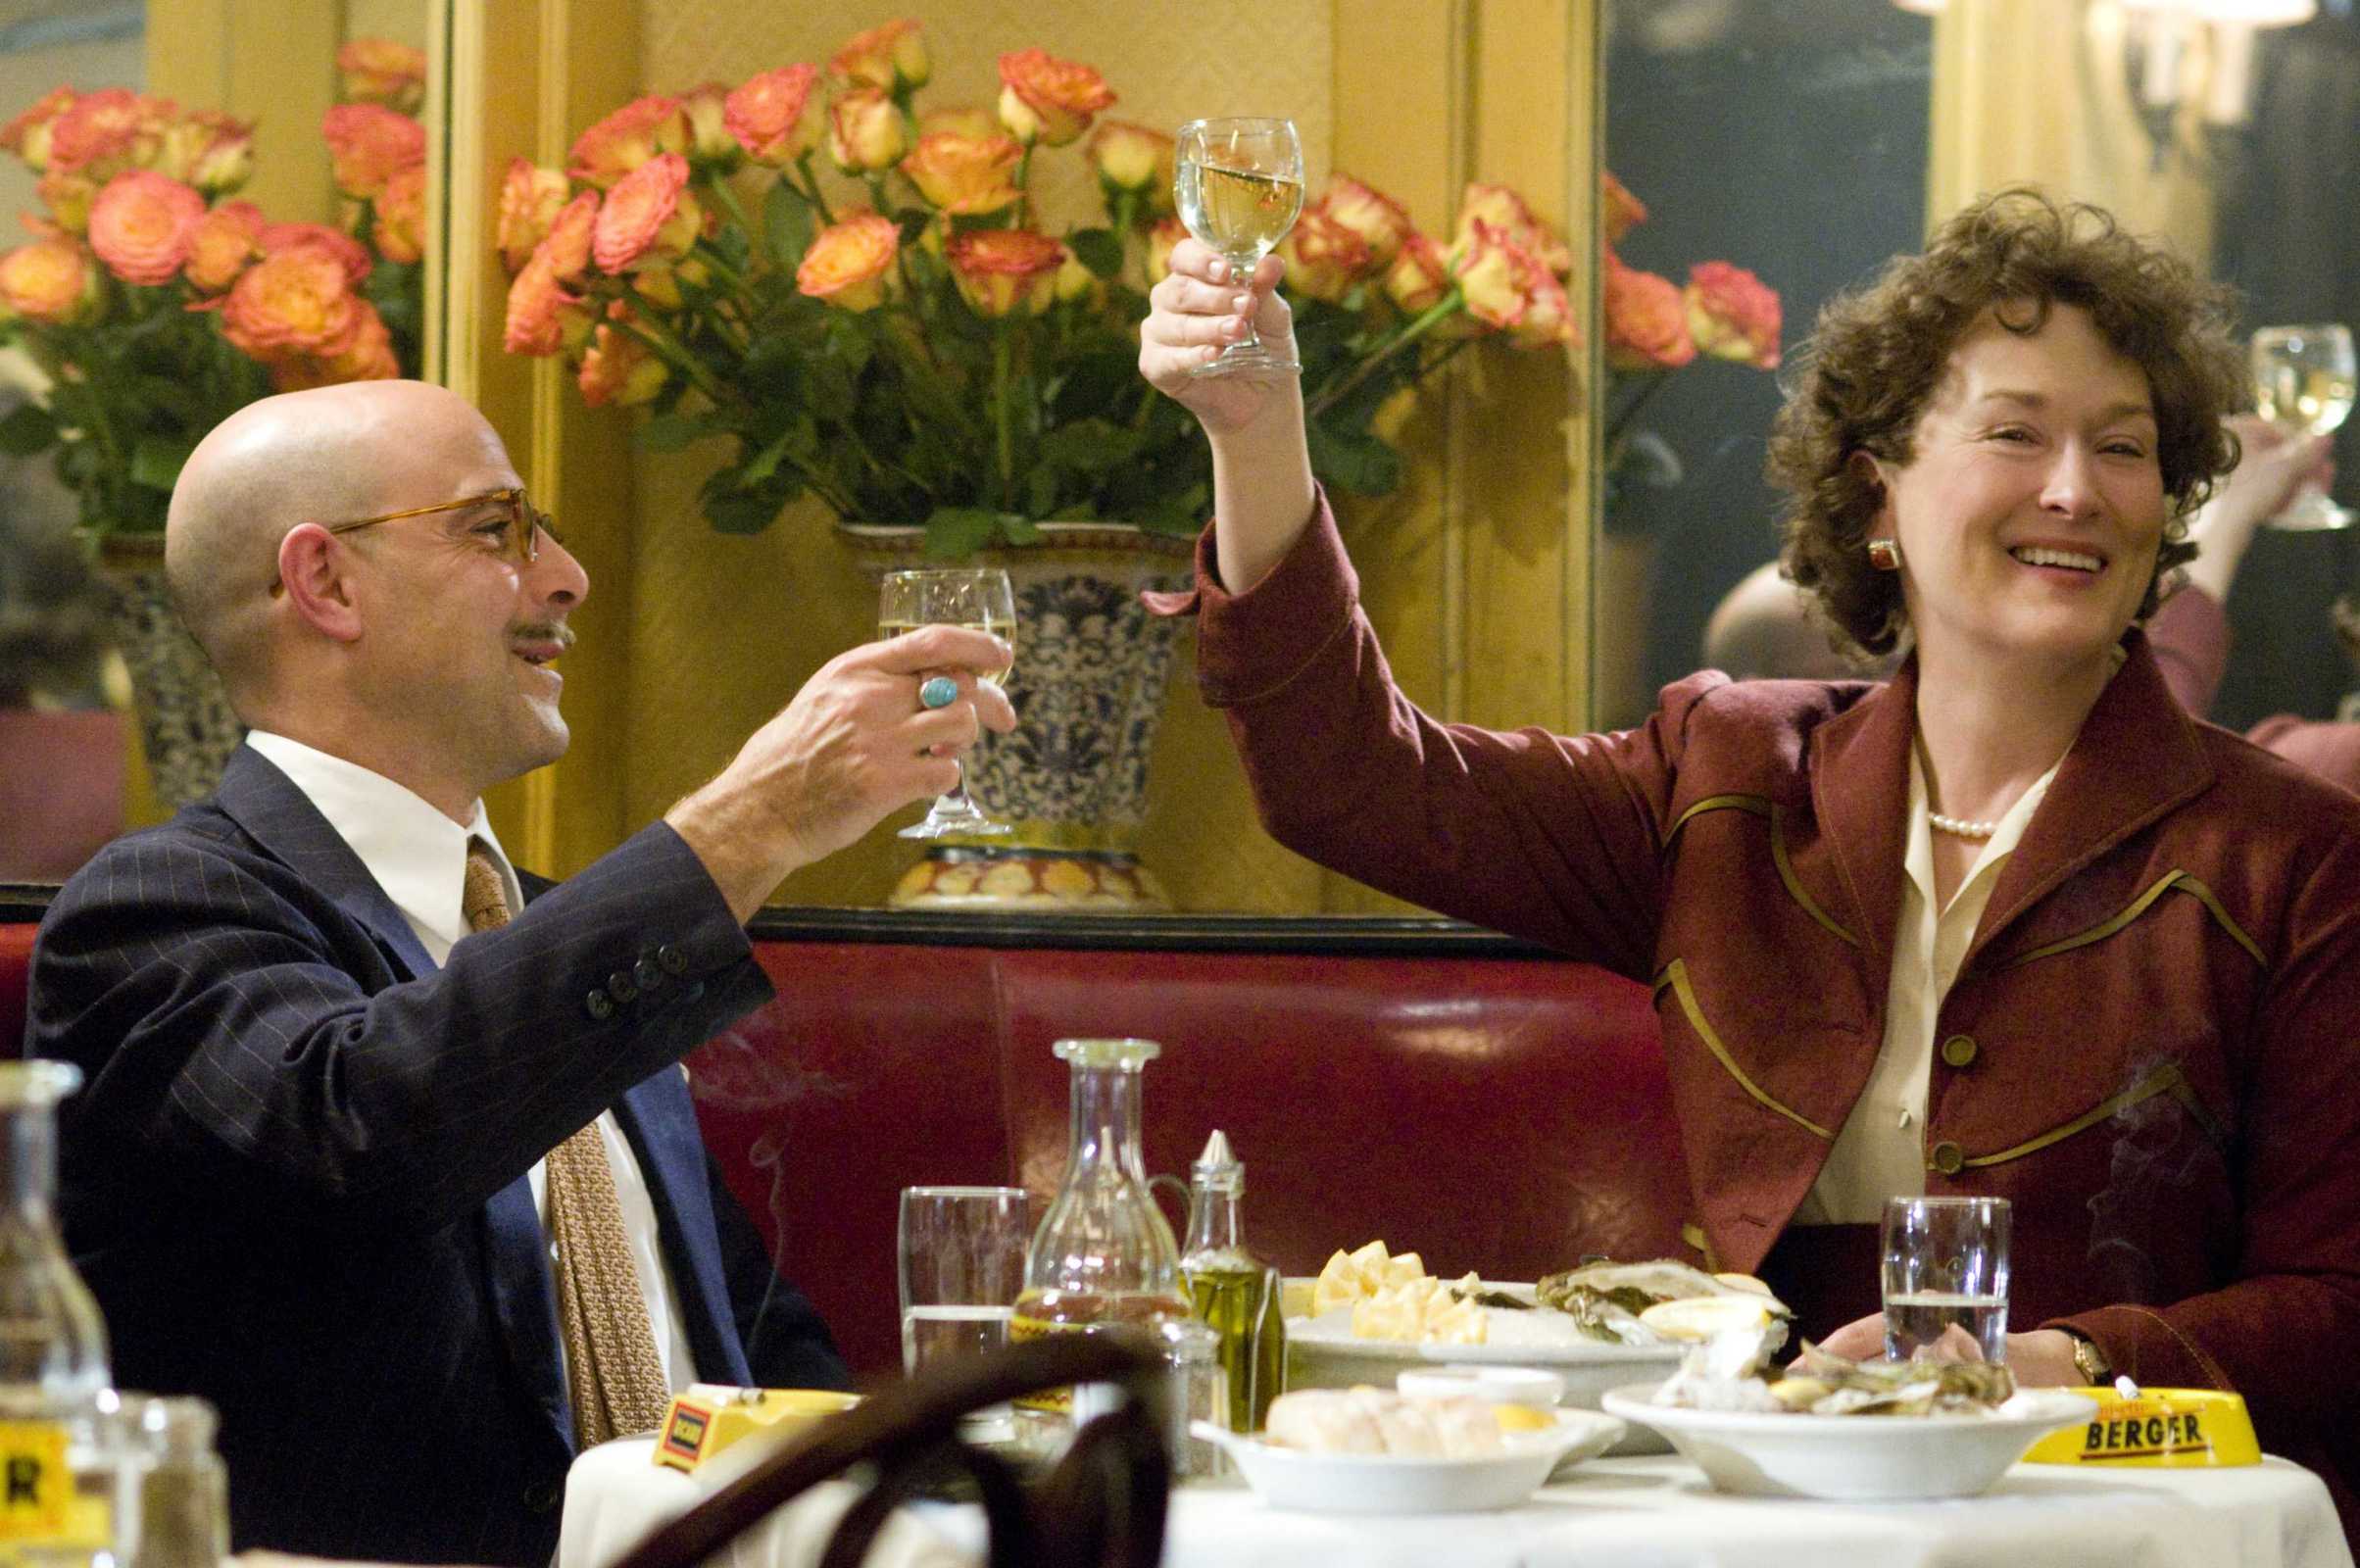 Stanley Tucci as "Paul Child" and Meryl Streep as "Julia Child"